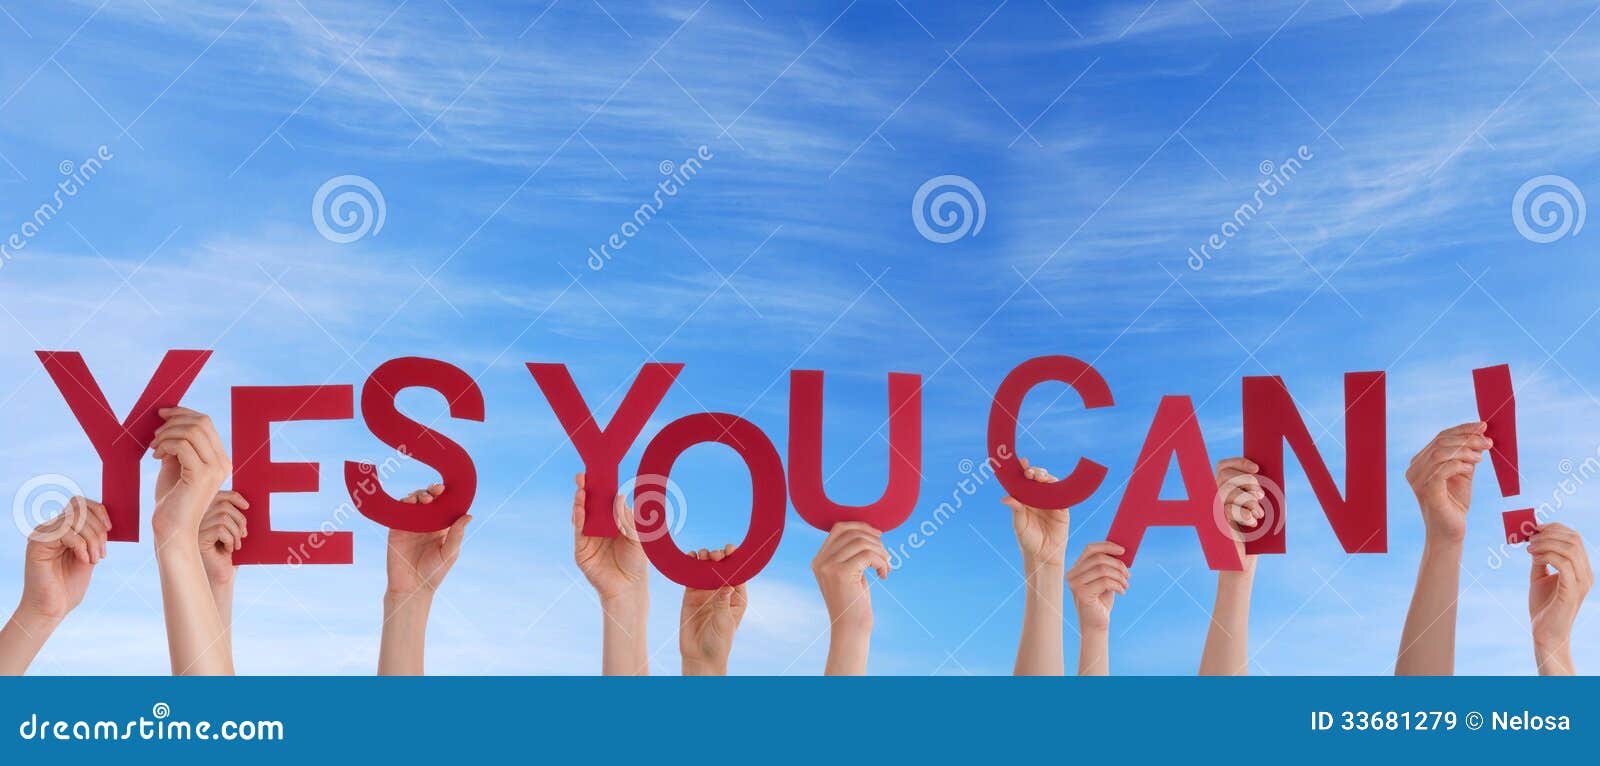 https://thumbs.dreamstime.com/z/hands-holding-yes-you-can-sky-many-words-33681279.jpg